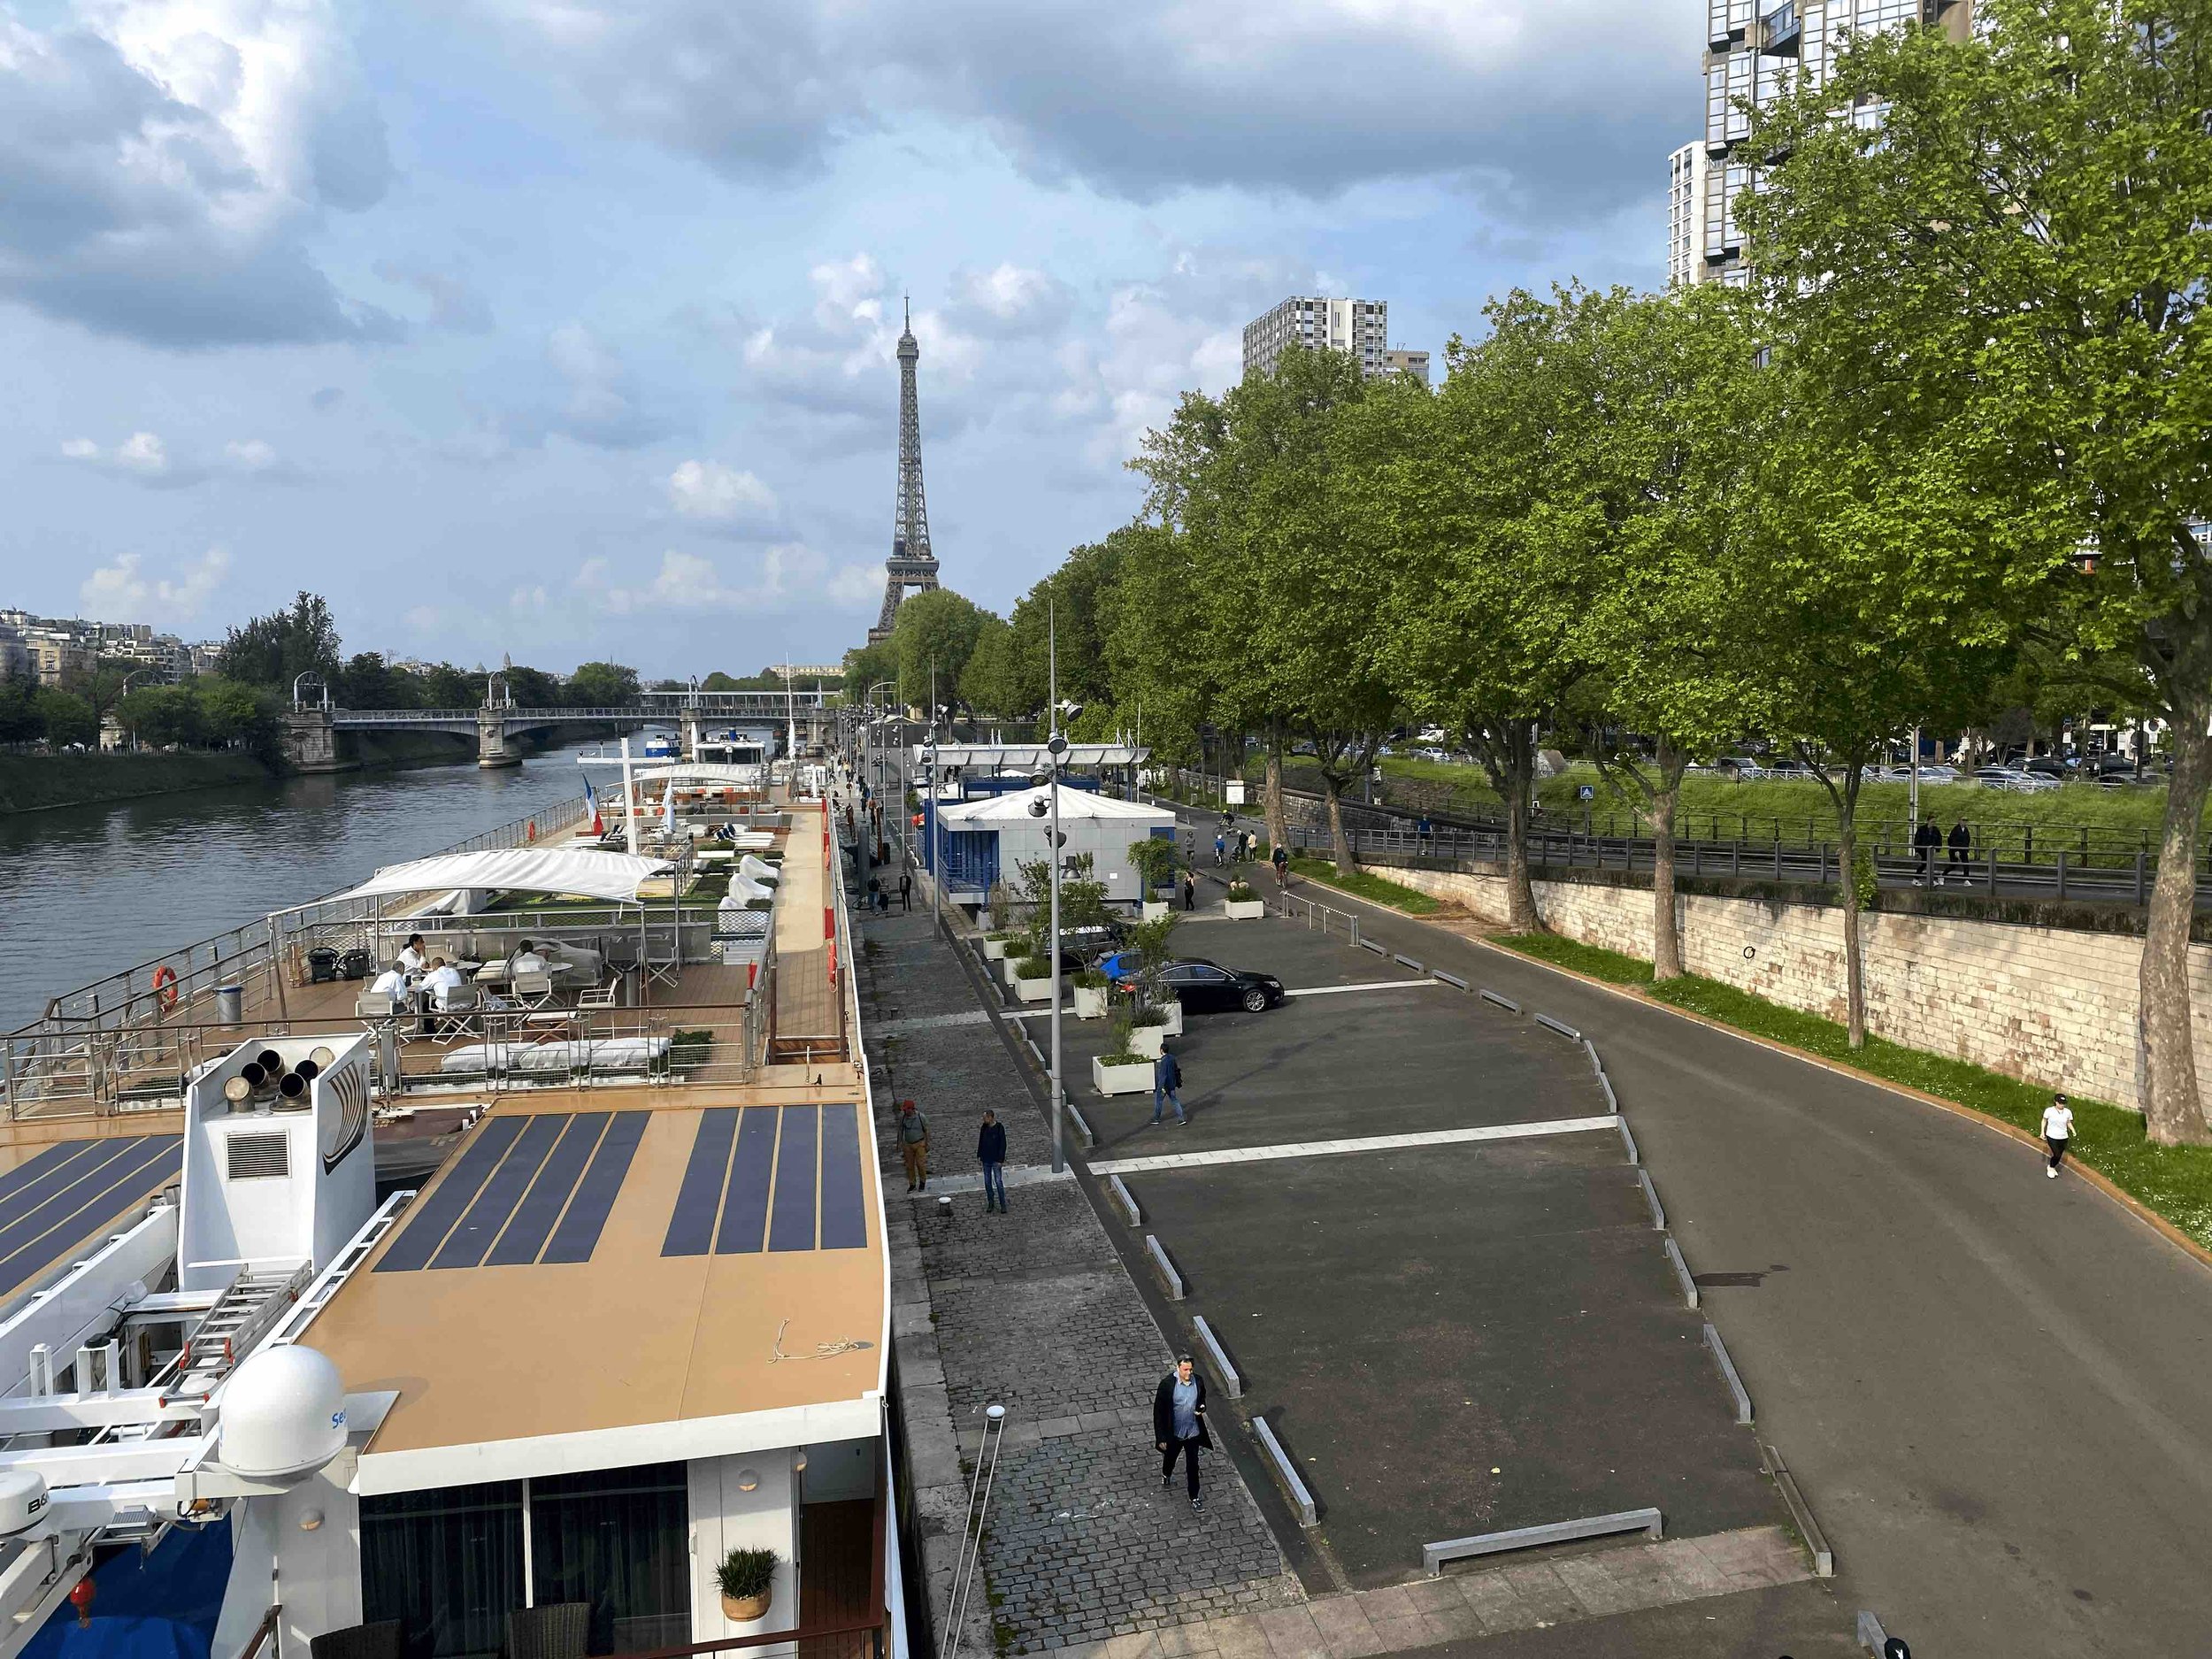  The immediate riverfront zone, encompasses several areas with specific functions. From left to right, these include the riverboat movement area, docking, and a pedestrian walkway. Following these areas is a multi-use zone which provides limited car 